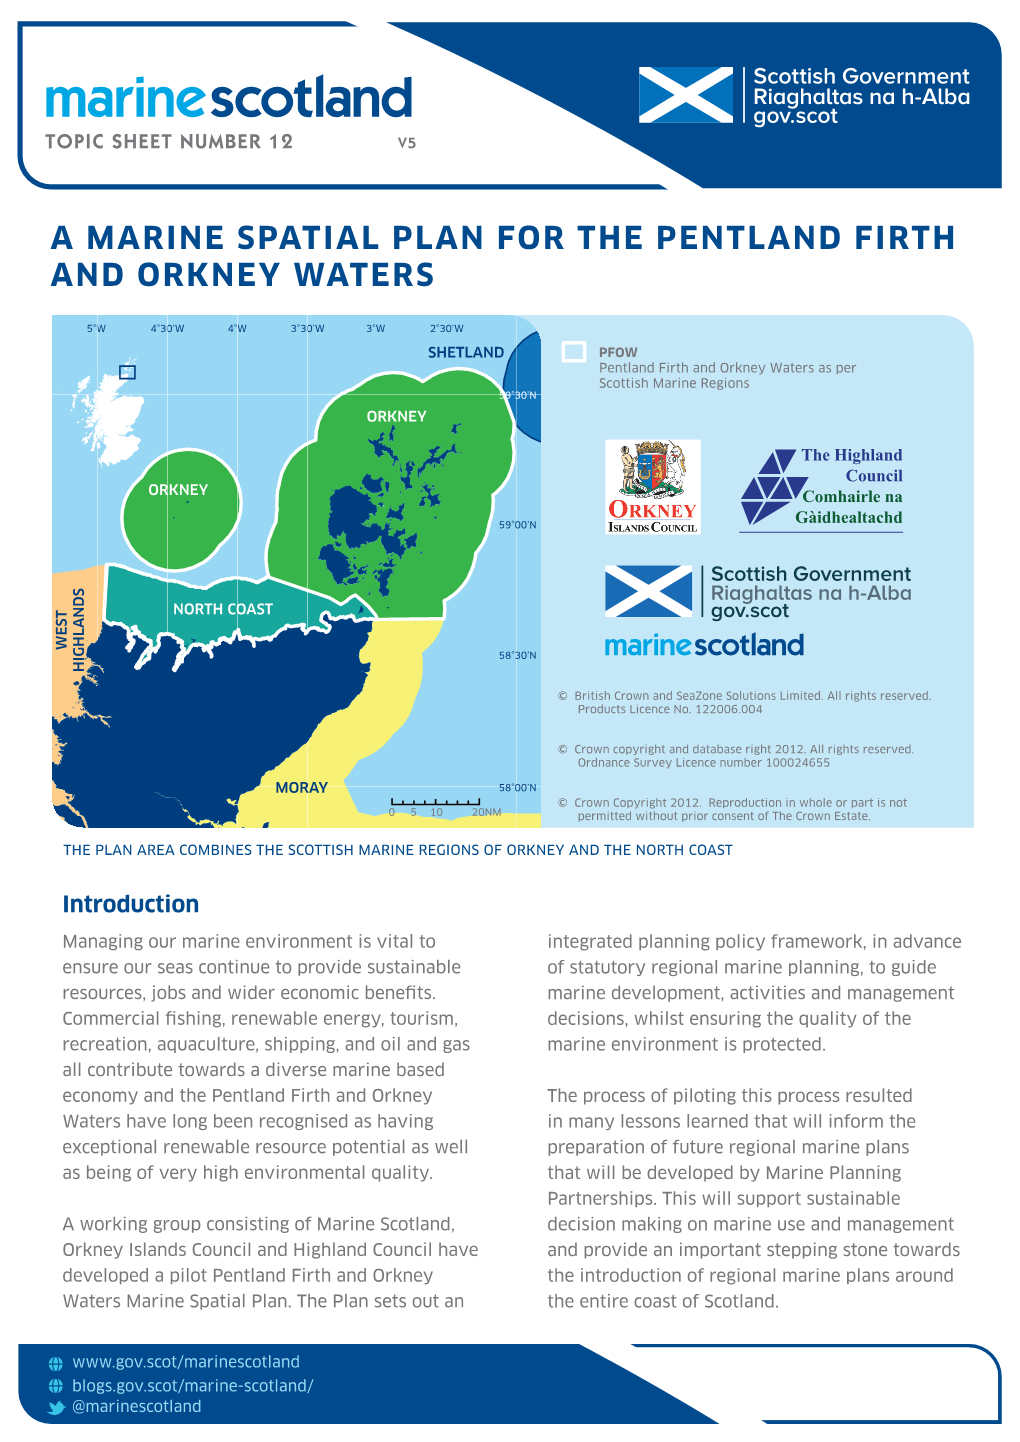 A Marine Spatial Plan for the Pentland Firth and Orkney Waters